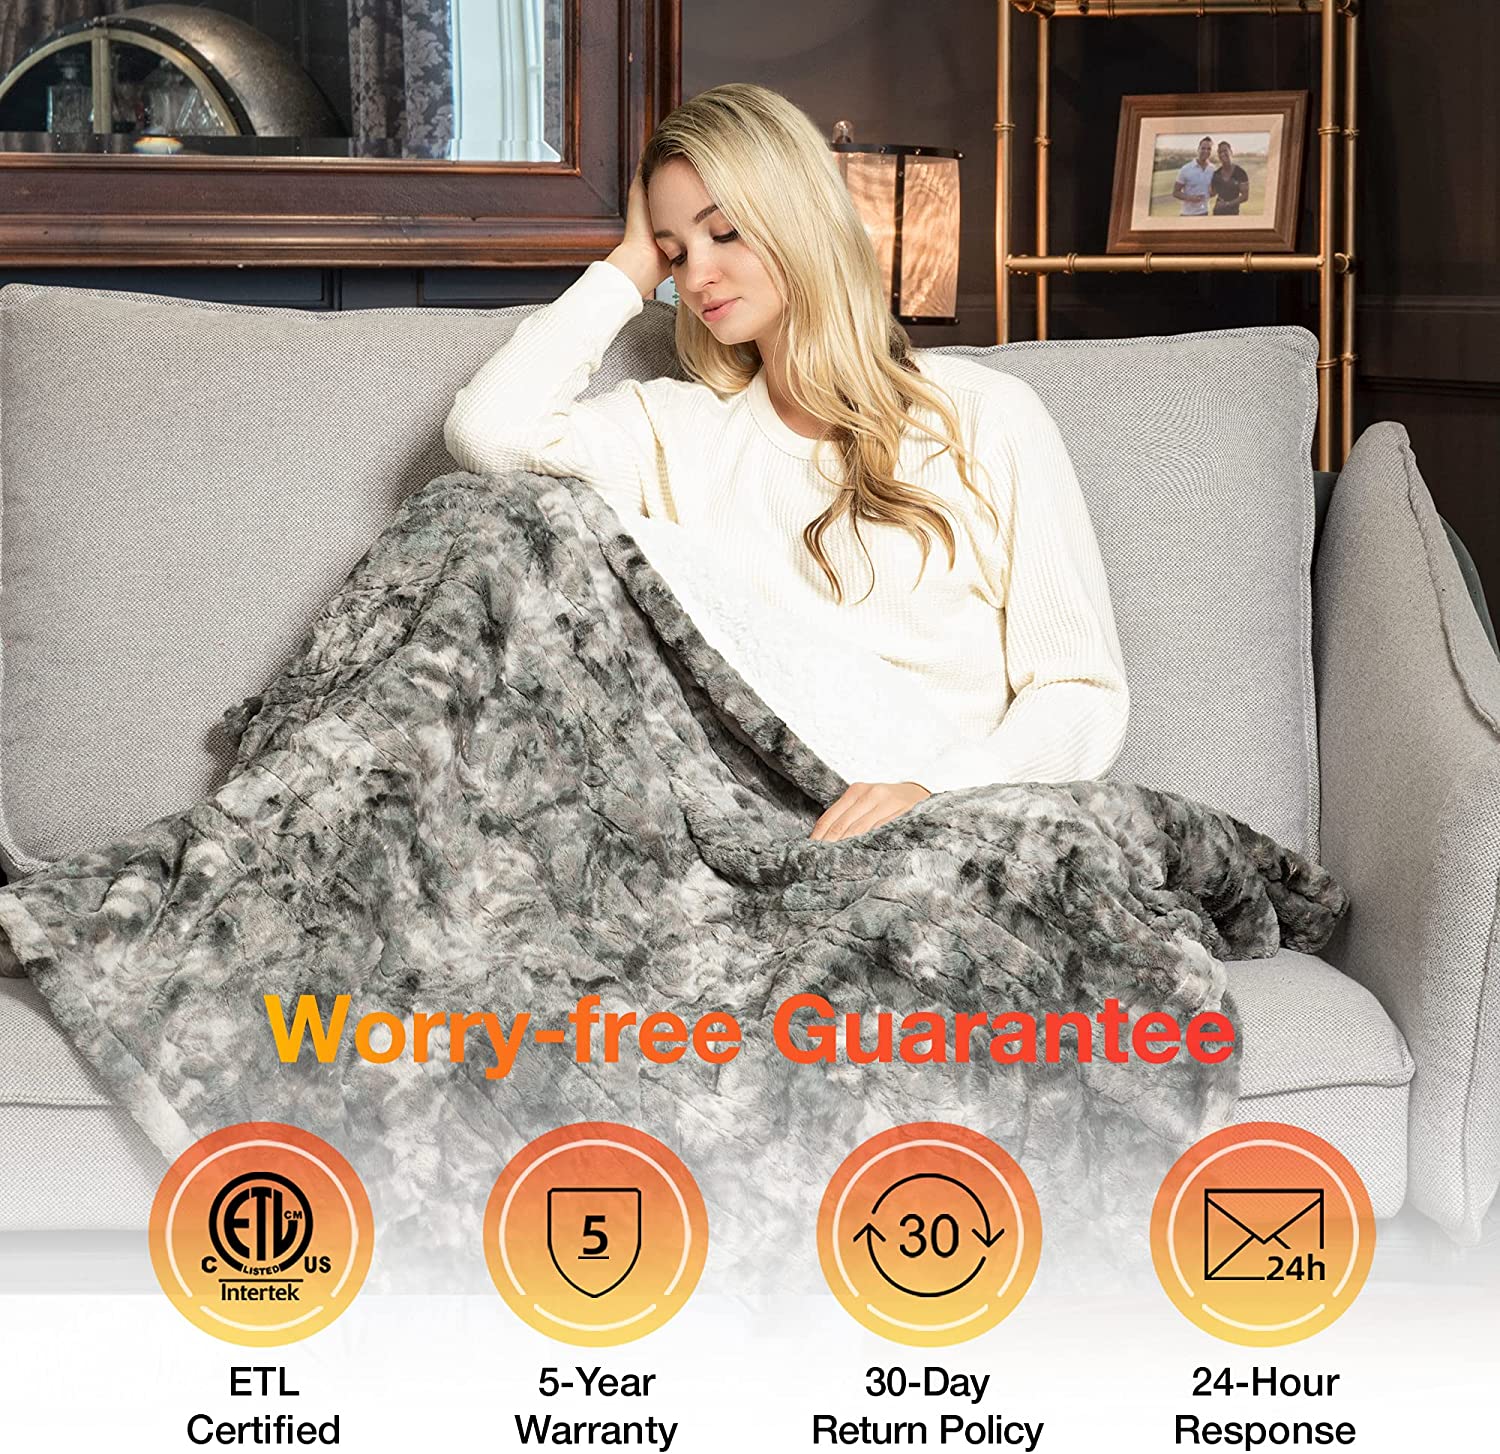 Electric Heating Throw - Marble Grey